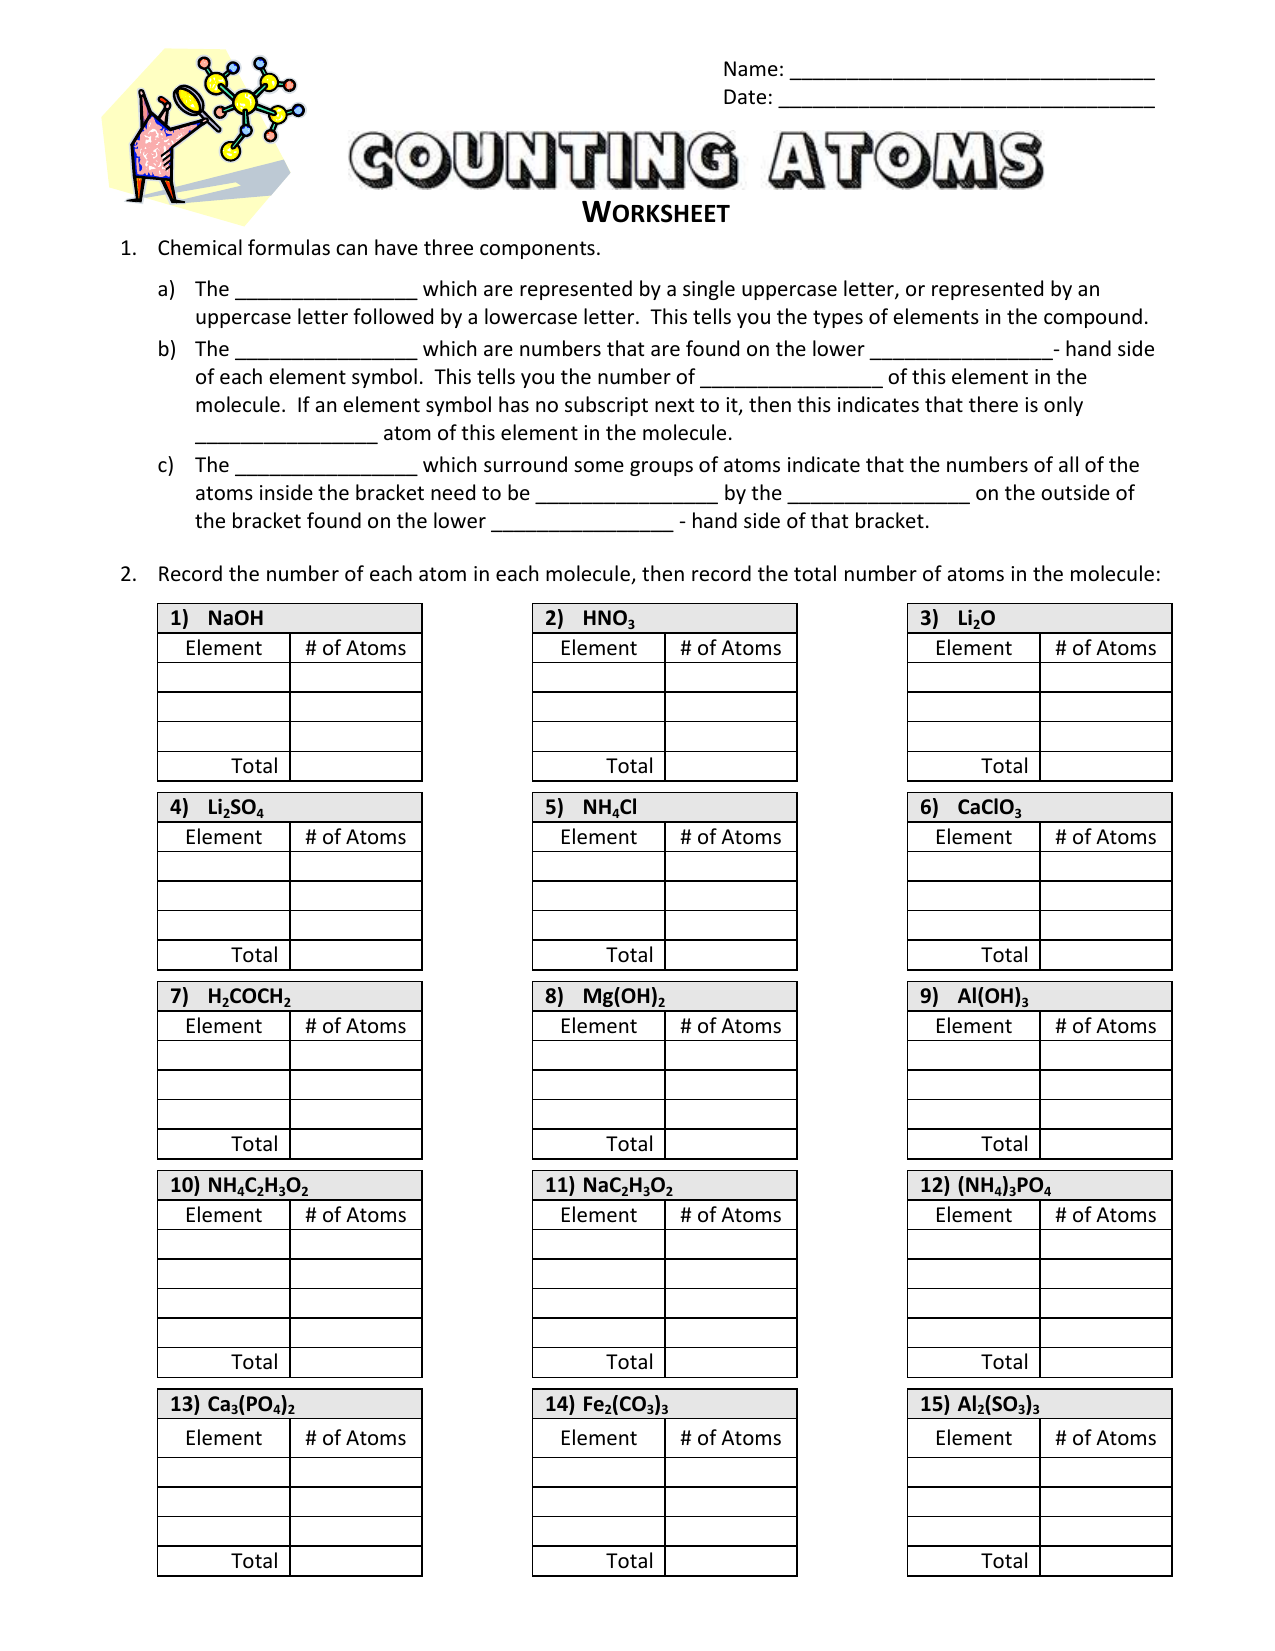 Counting Atoms - Worksheet Throughout How To Count Atoms Worksheet